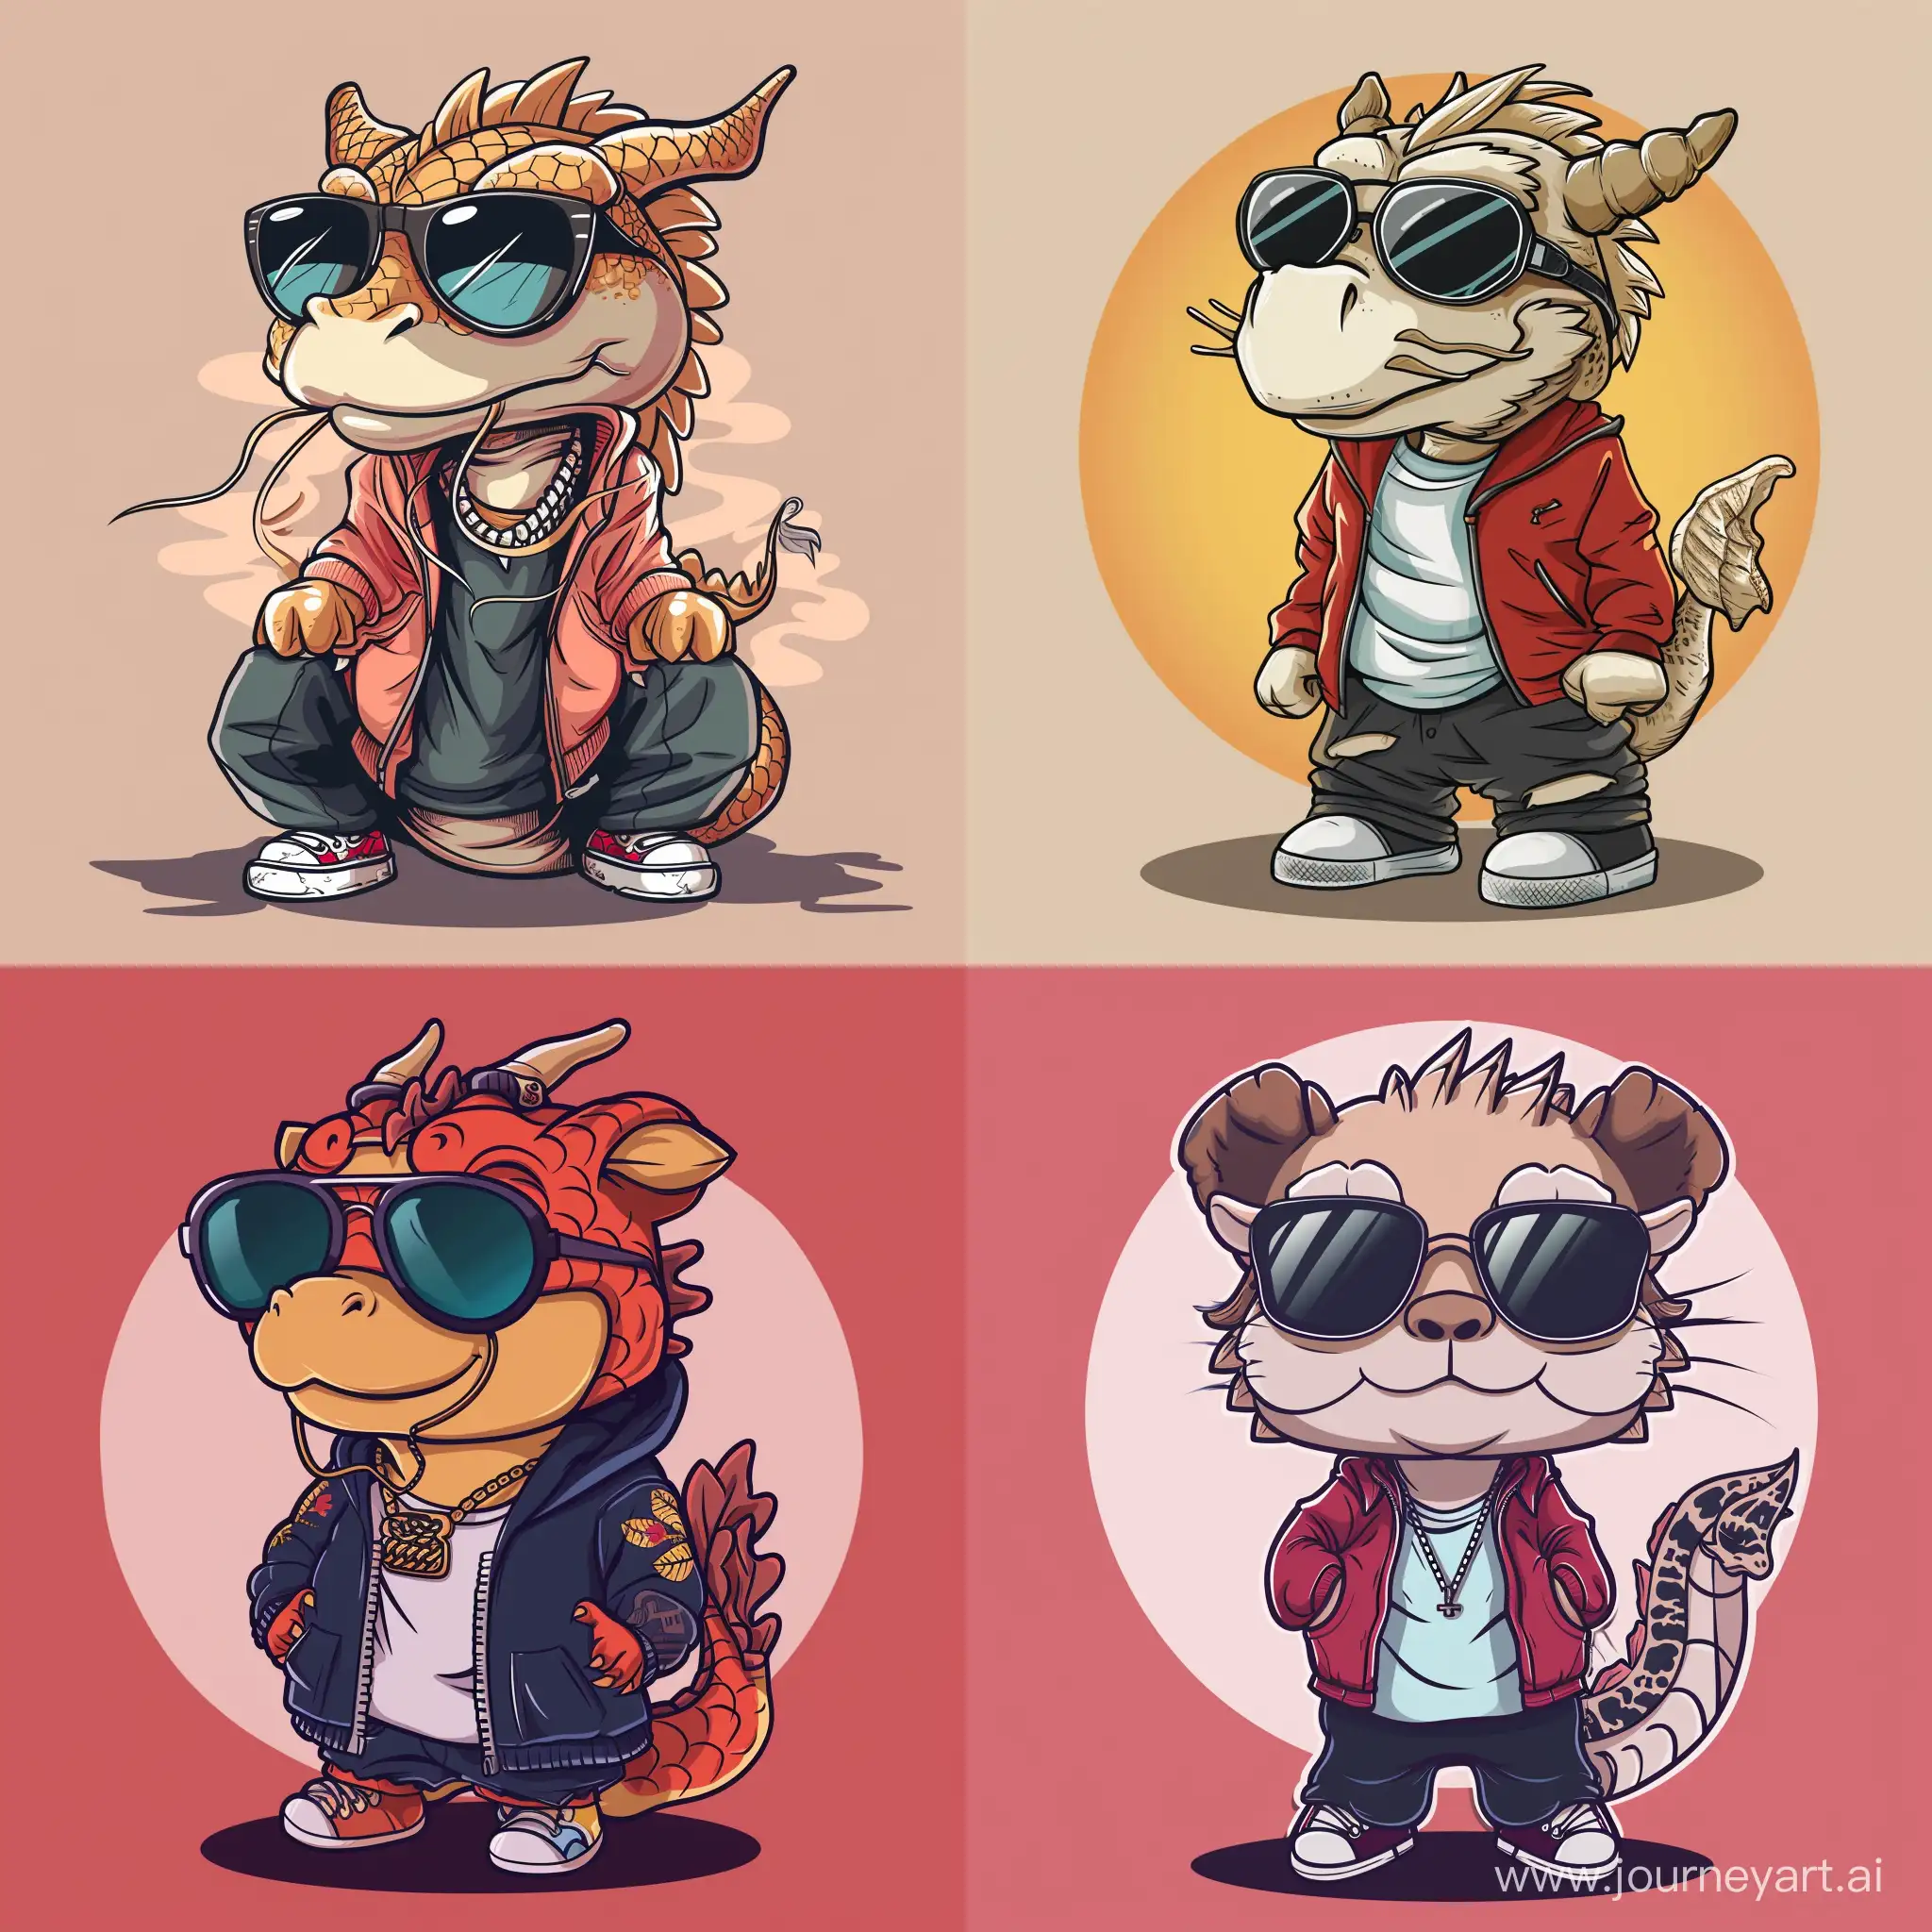 Cute Chinese Dragon wearing sunglasses and hip hop clothes